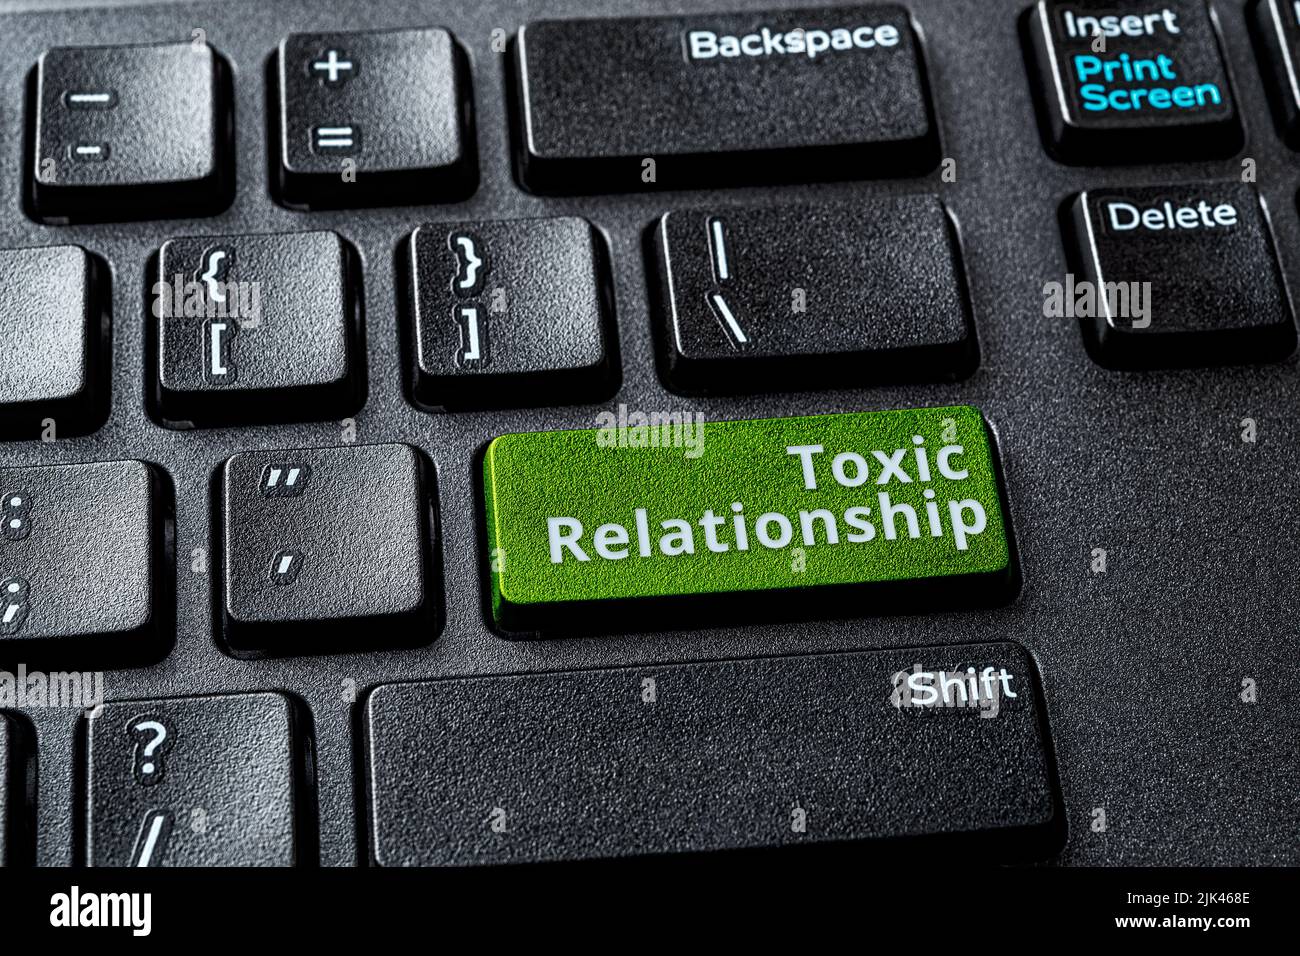 Toxic relationship words on the green enter key of a desktop computer keyboard. Concept of unsupported, misunderstood, demeaned relationship online. Stock Photo